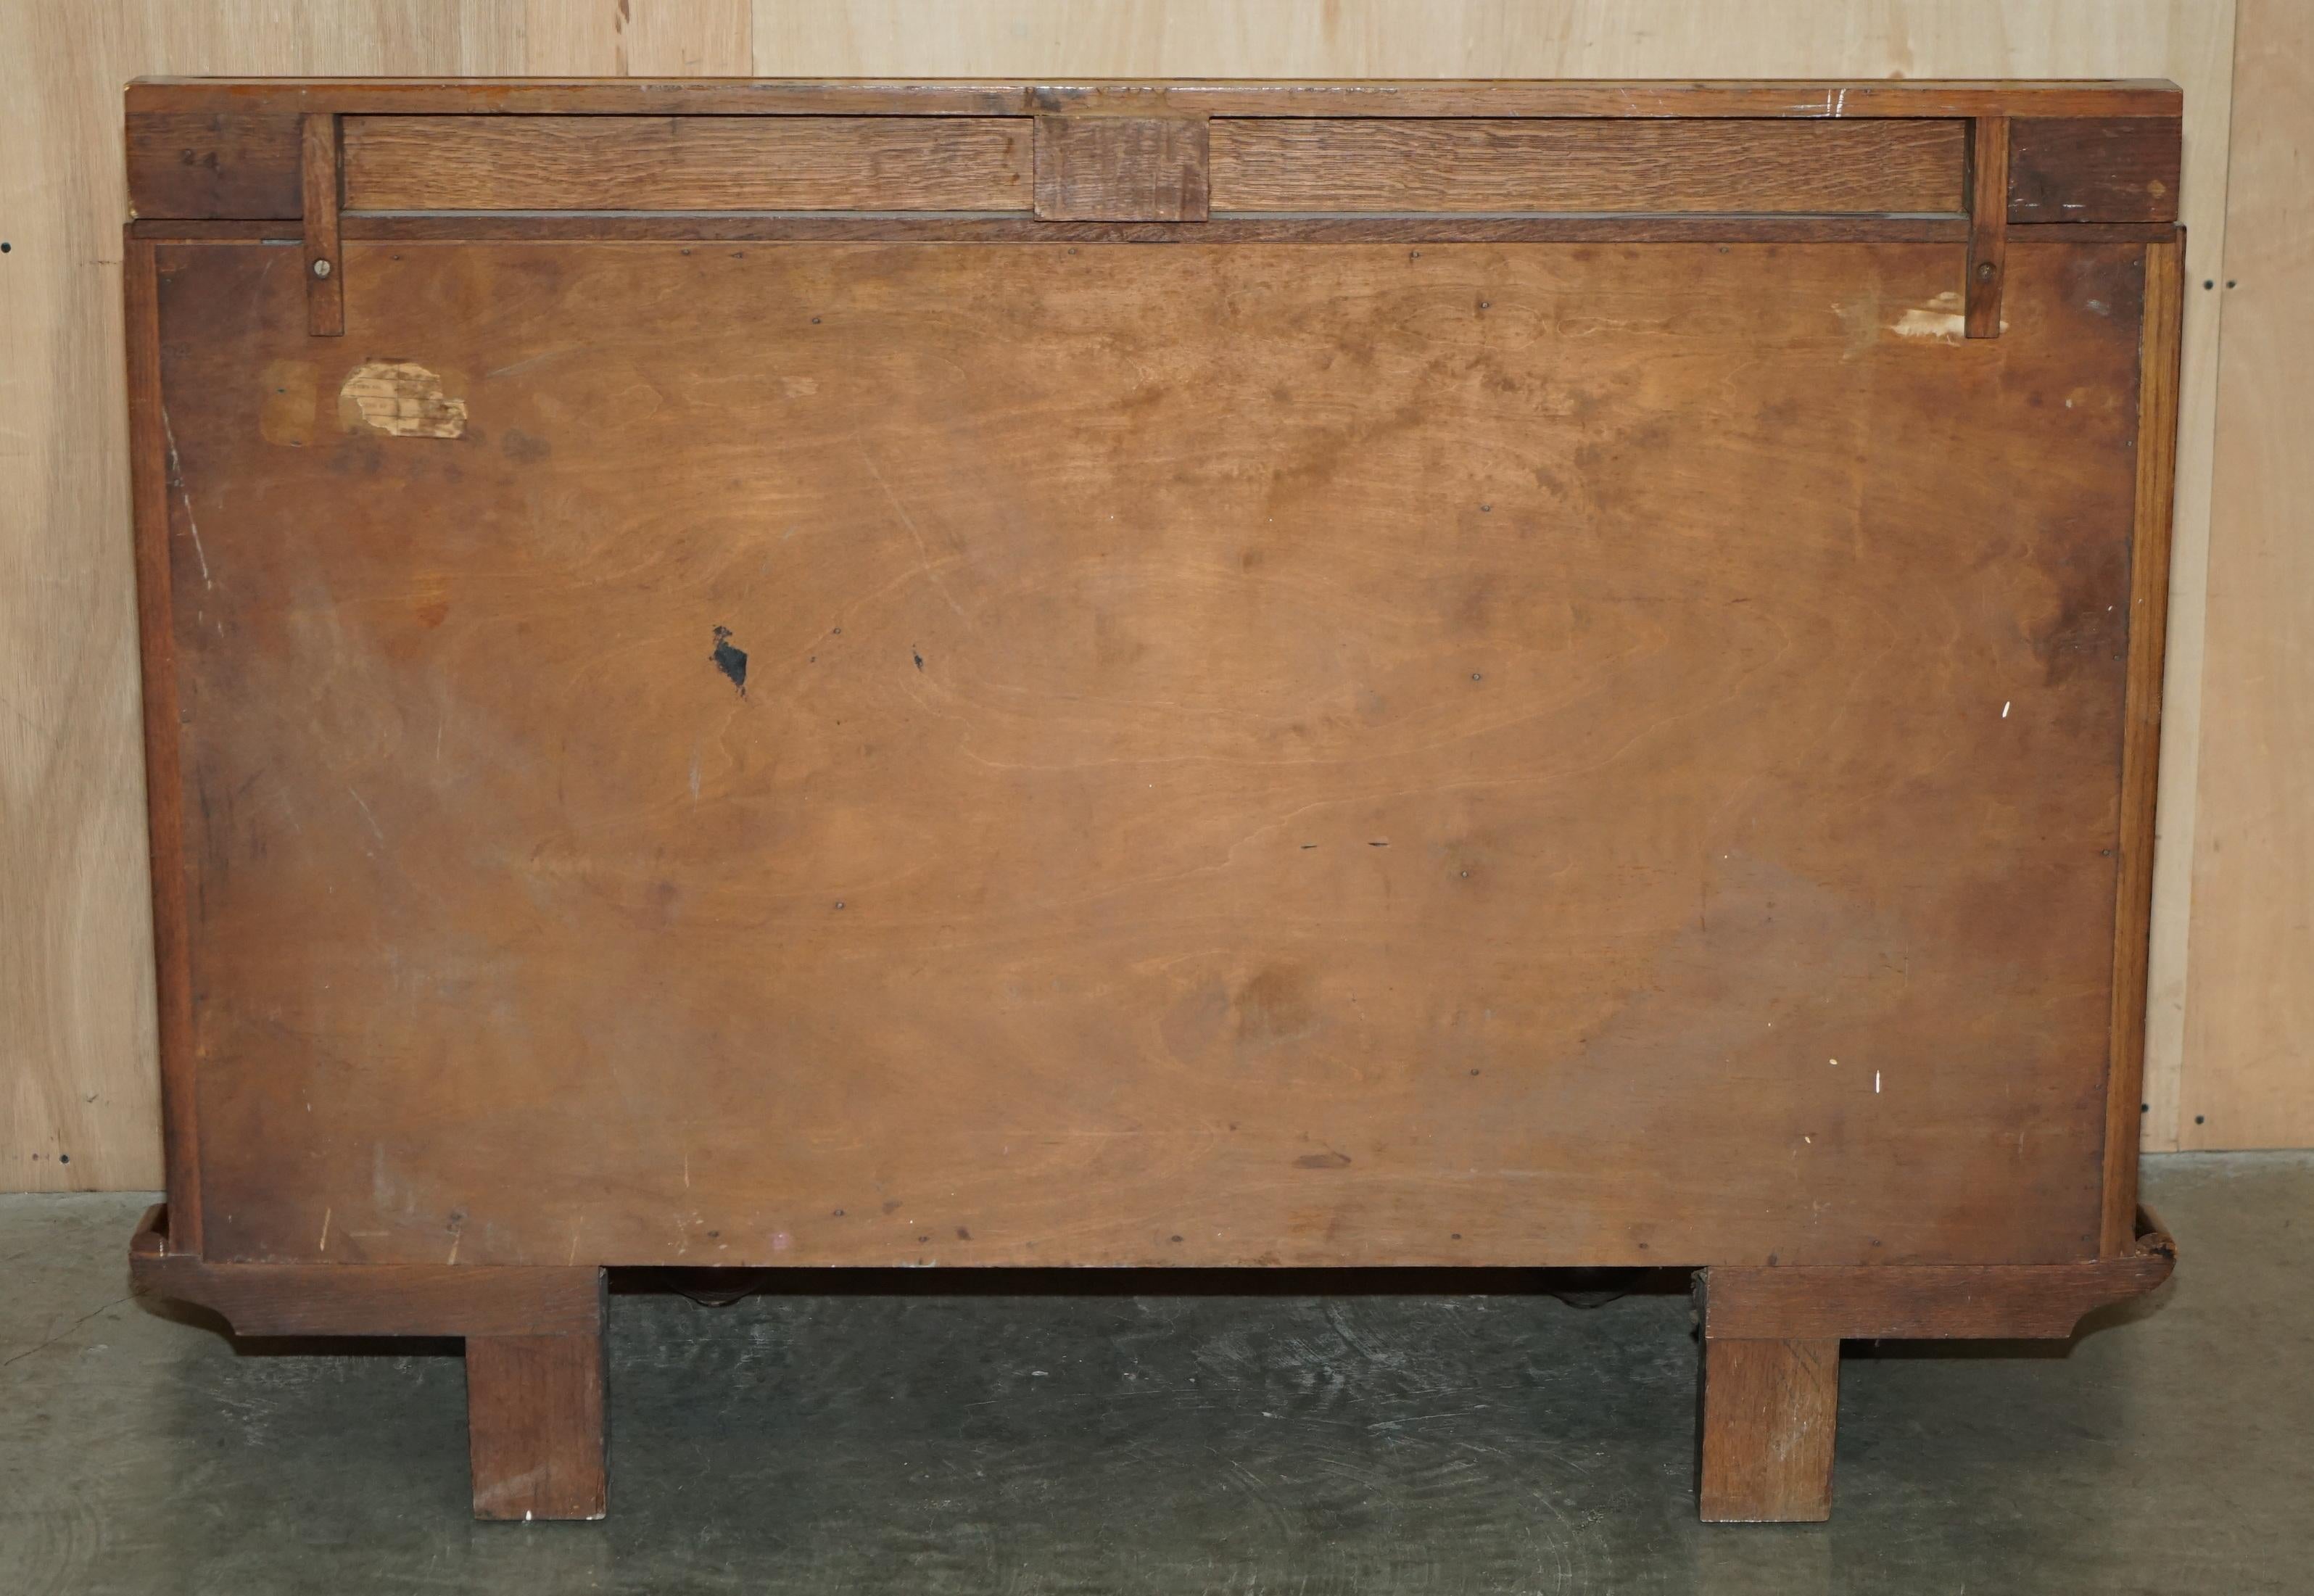 FINE LIBERTY'S COTSWOLD ART DECO OAK CARVED SiDEBOARD CIRCA 1920 PART OF A SUITE im Angebot 8